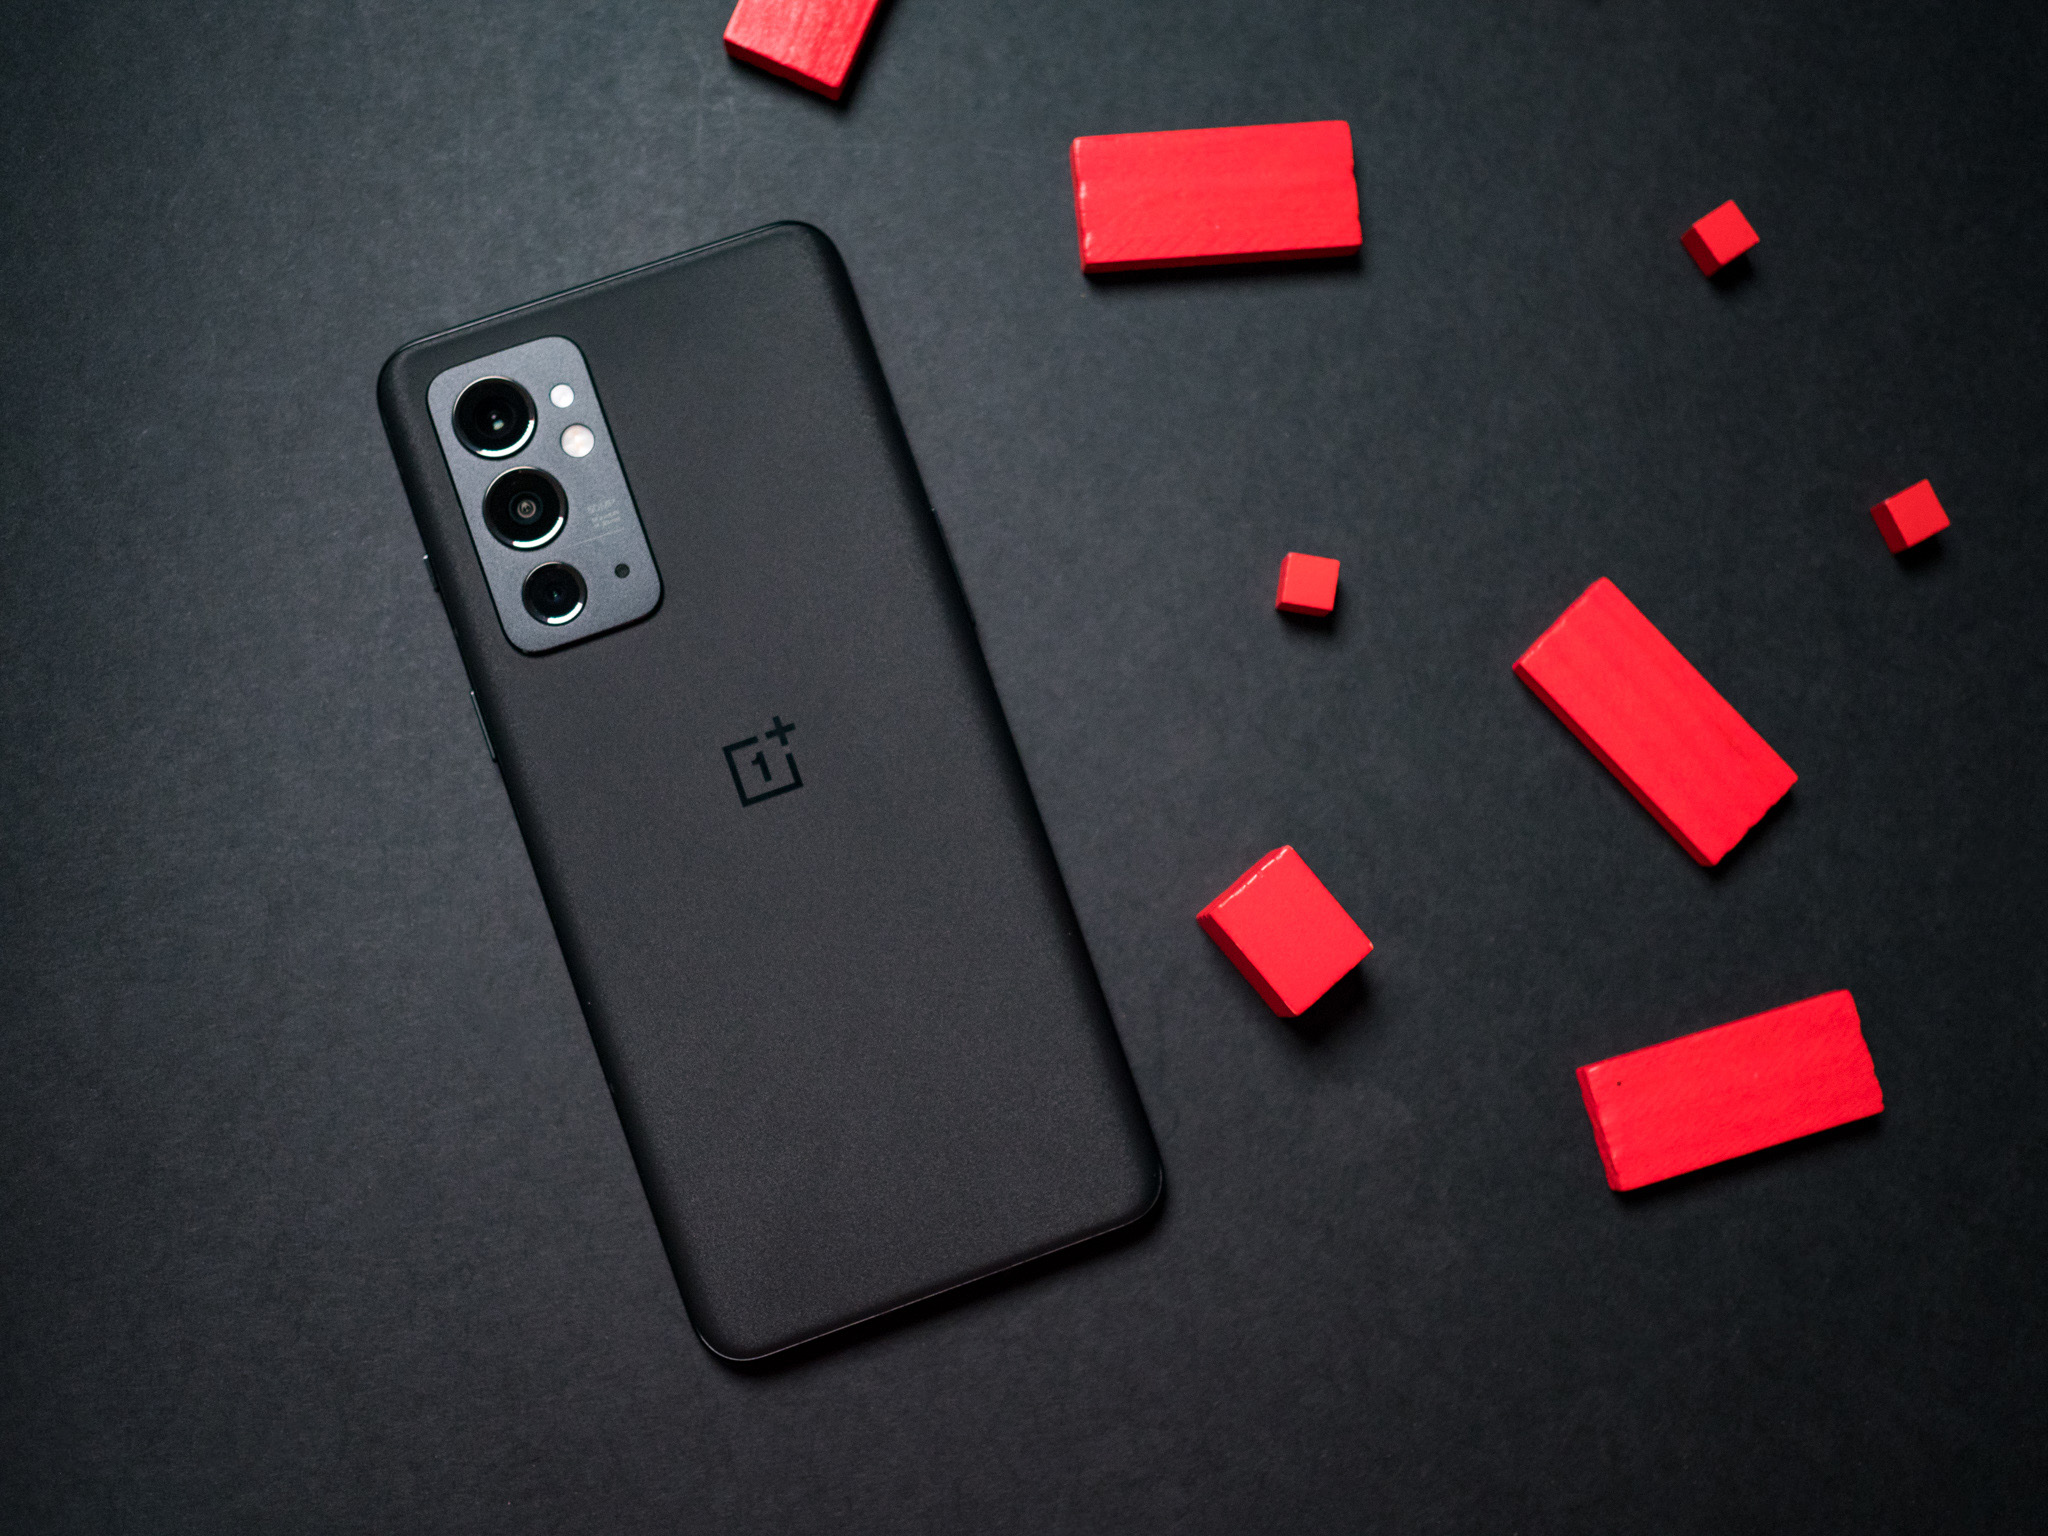 OnePlus RT reportedly in the works as camera specs leak